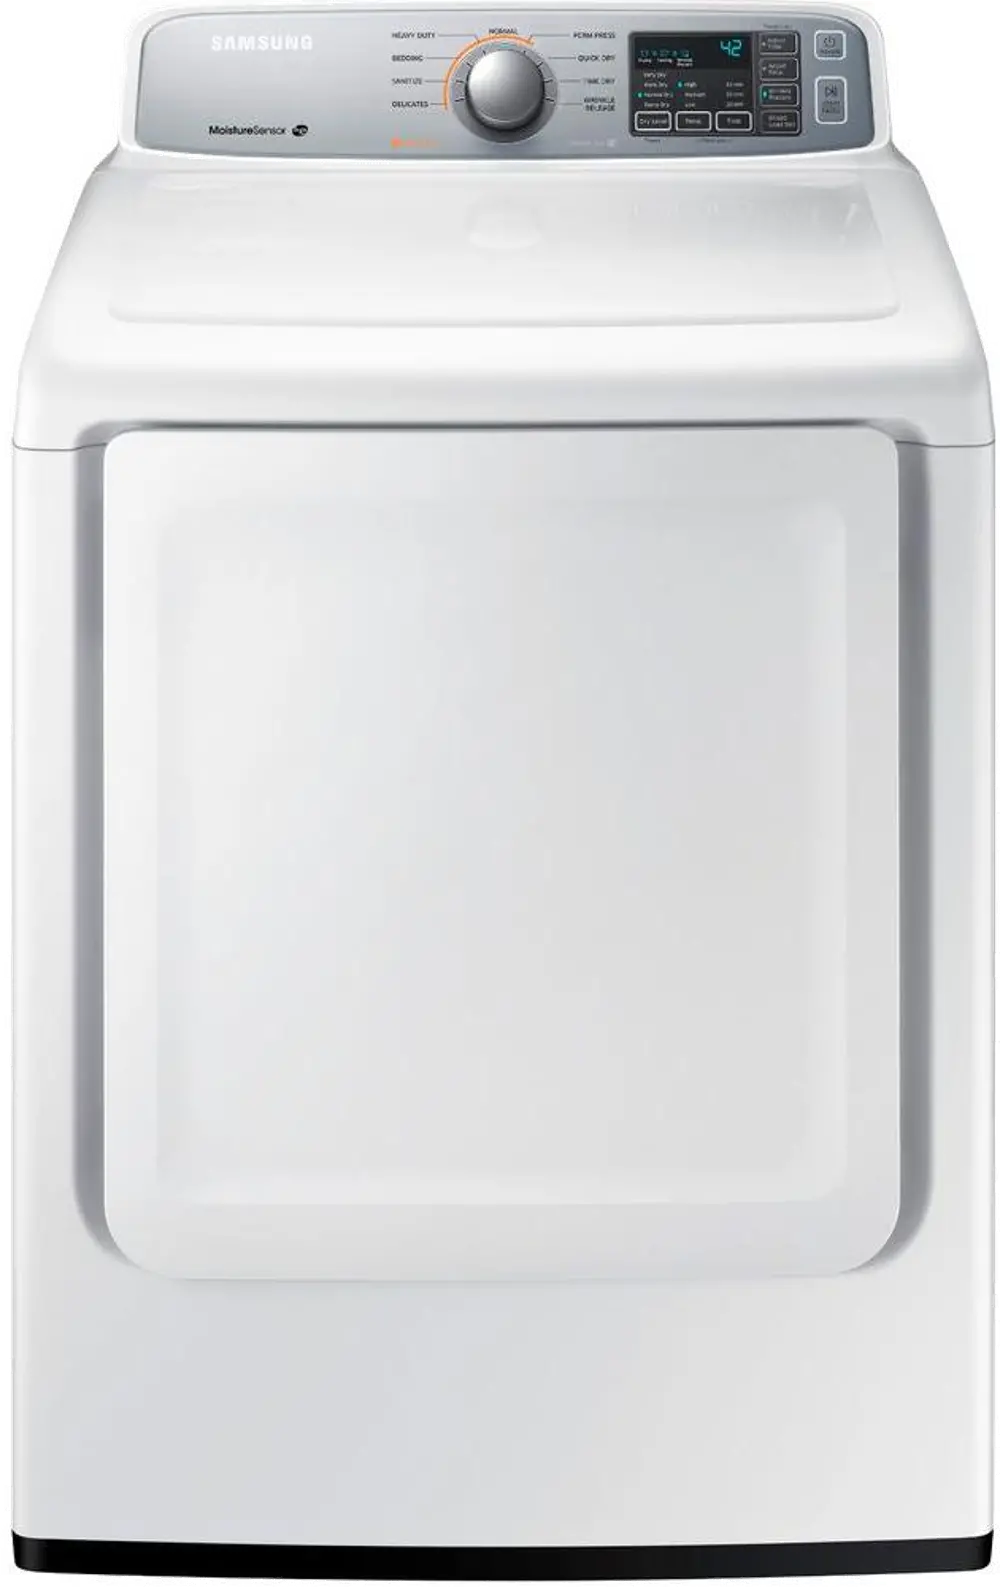 DV45H7000EW Samsung Electric Front Load Dryer - 7.4 cu. ft. White-1